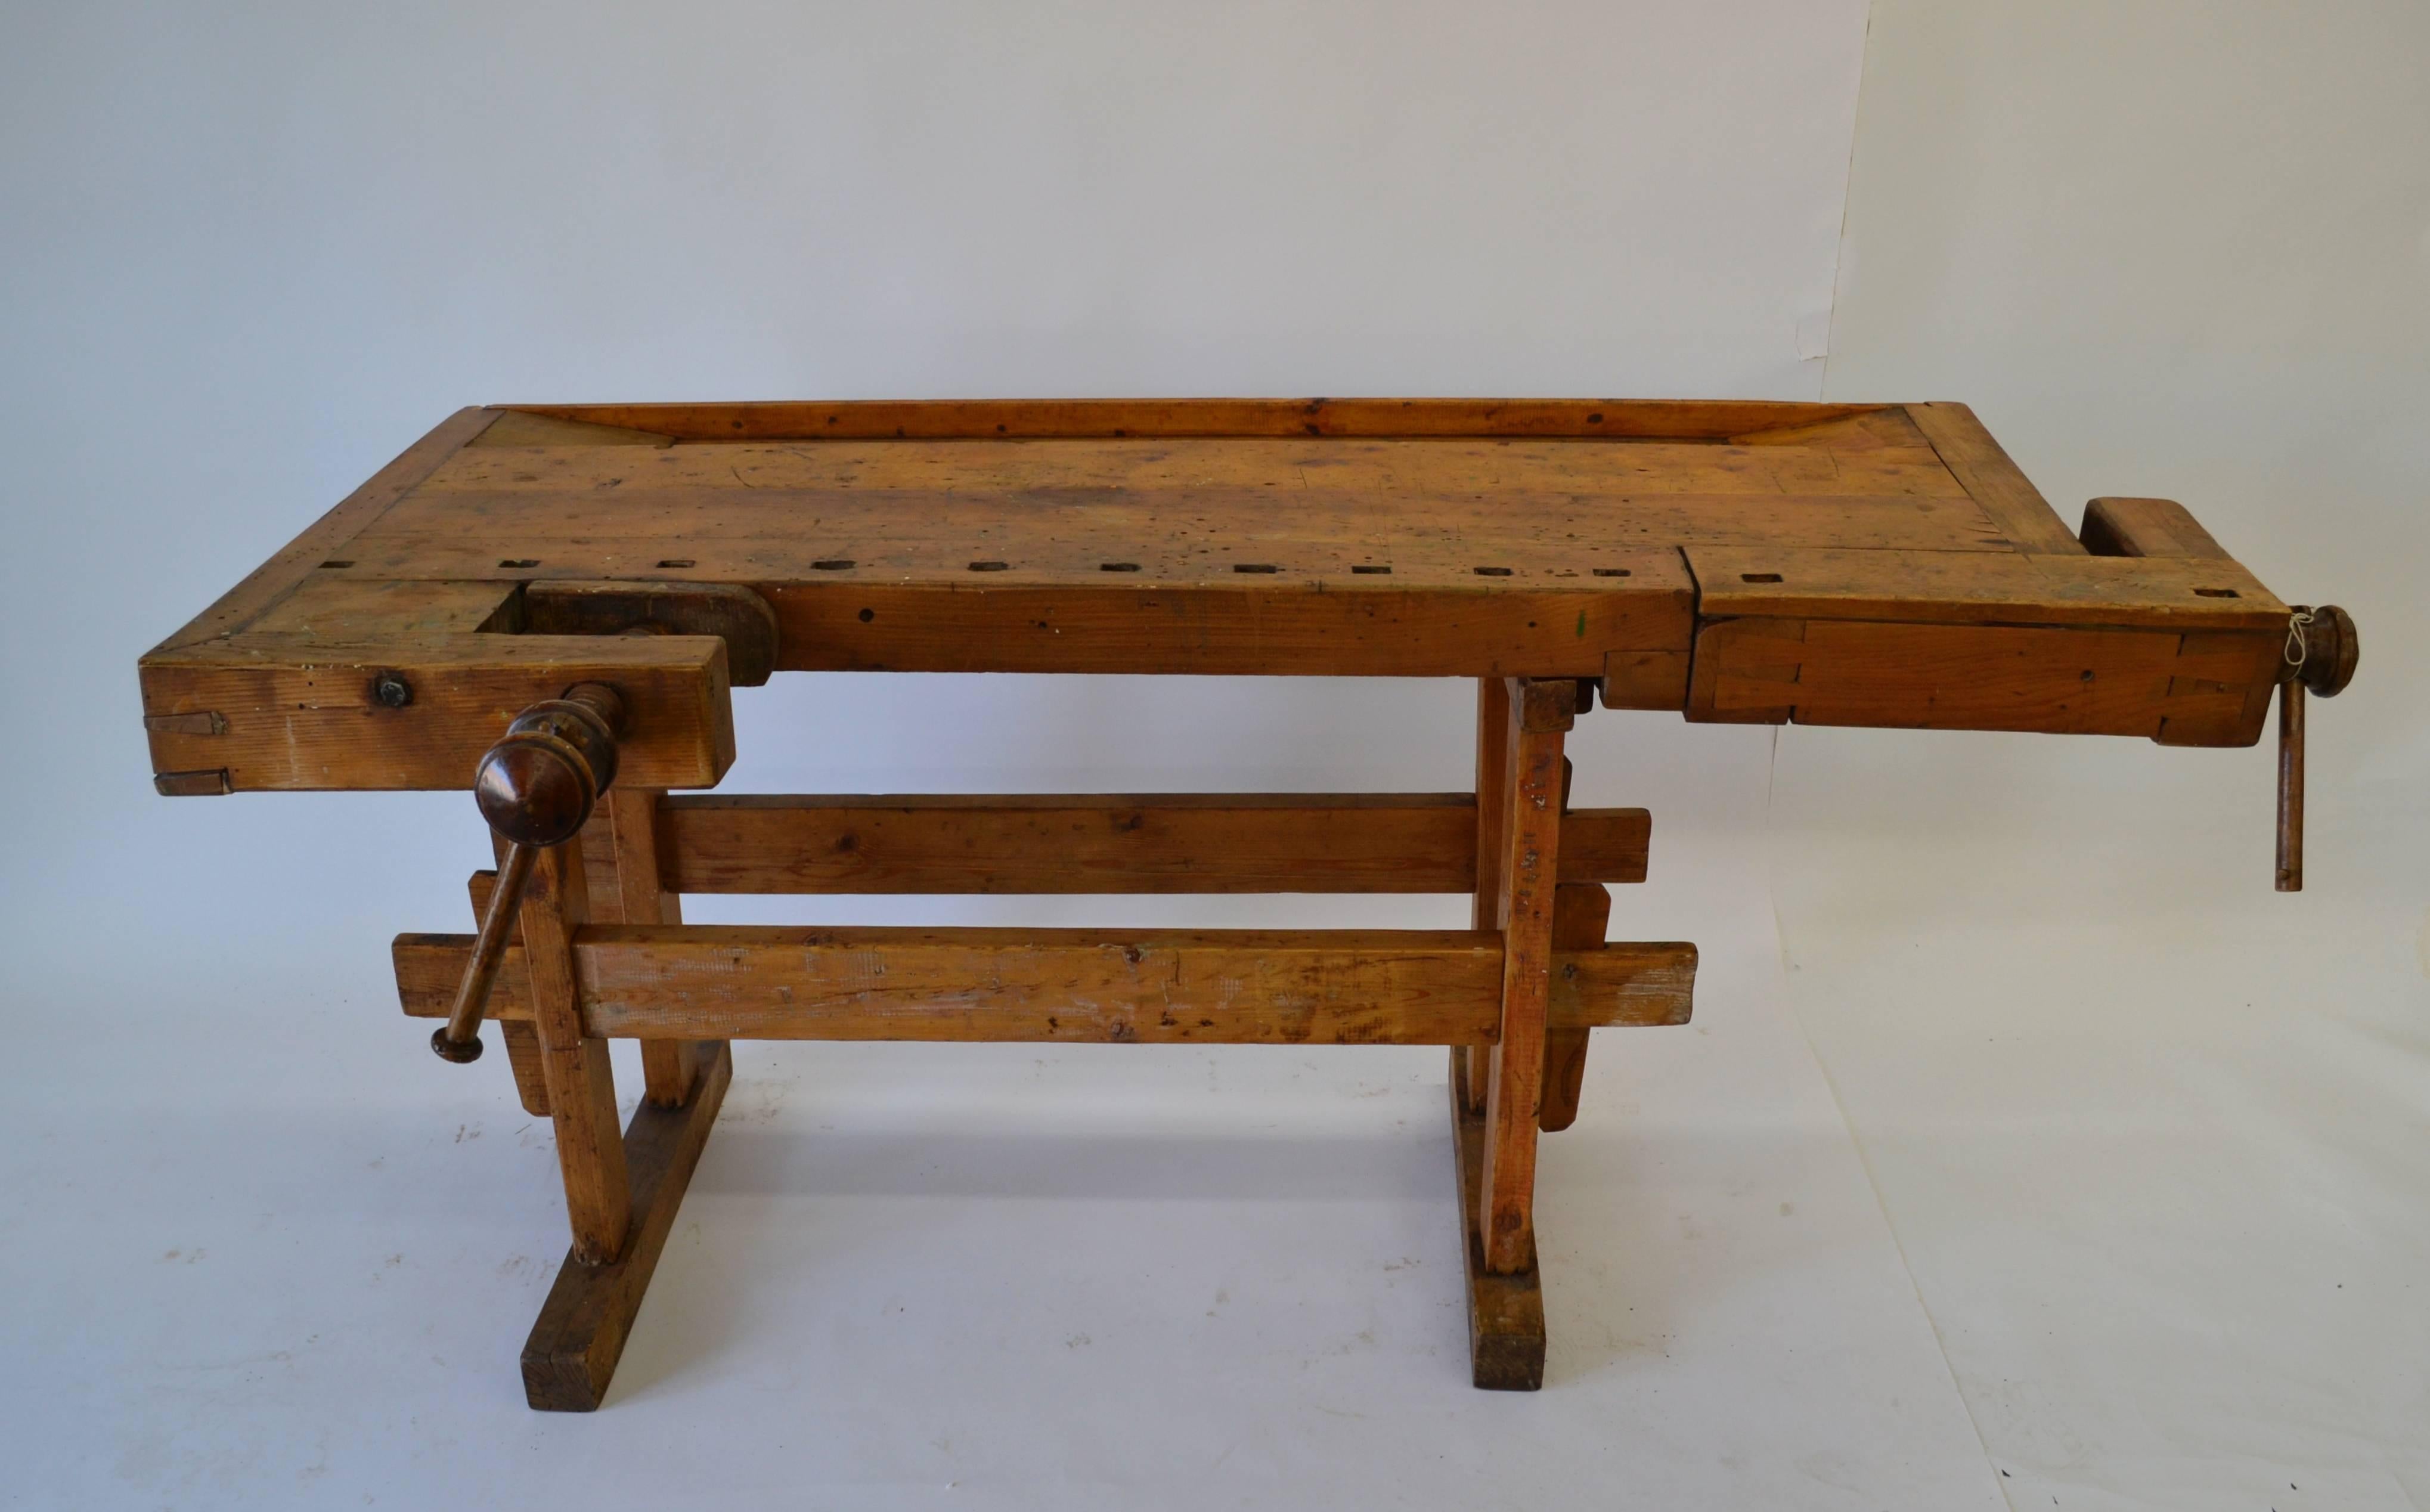 Another outstanding workbench from our European sources. The three to four inch thick oak top has wooden screw turned vises on the front and left hand side, both showing bold exposed dovetail construction. The collapsible pine and oak base has two